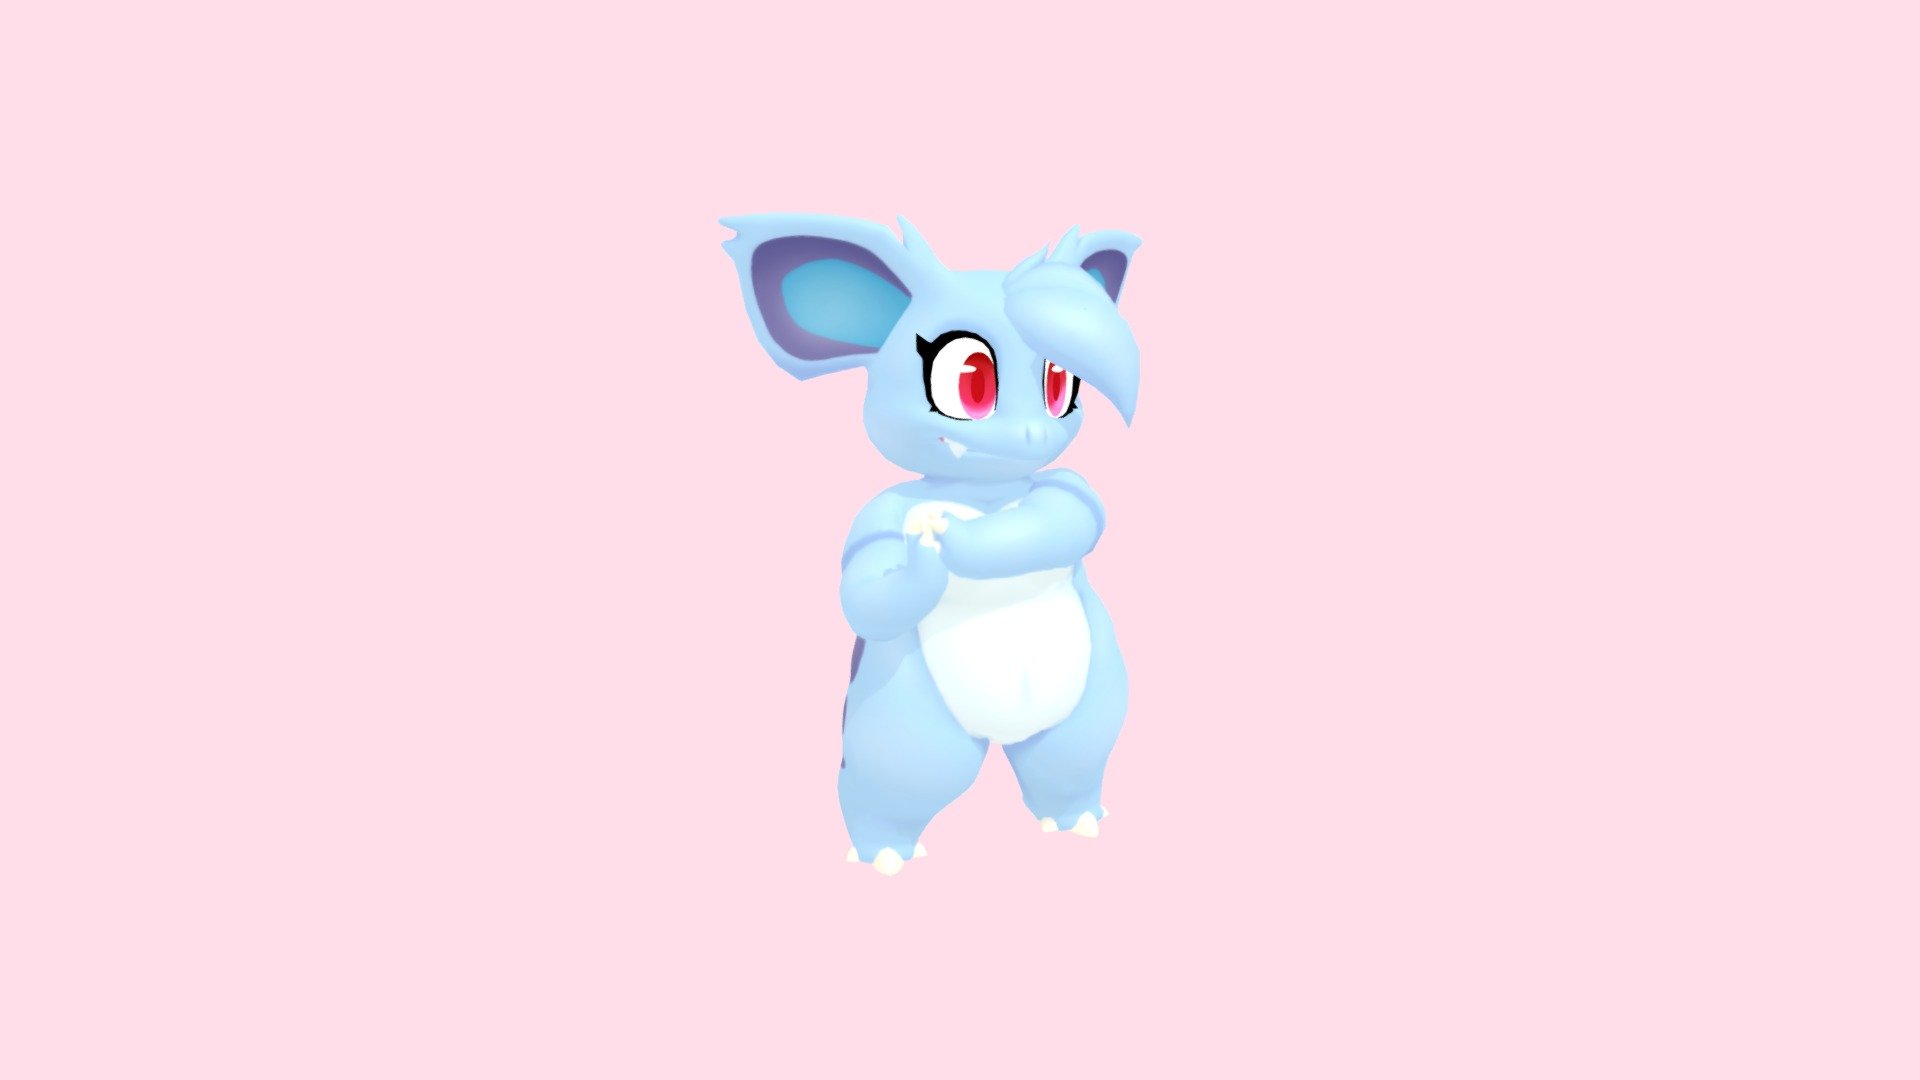 Character belongs to: https://aquabunny.creativeworlds.net/

You can also see her doing the Bytheway Dance:
https://aquabunny.creativeworlds.net/fan-films/bytheway-nidorina - Nidorina Schneider - 3D model by somefilth 3d model